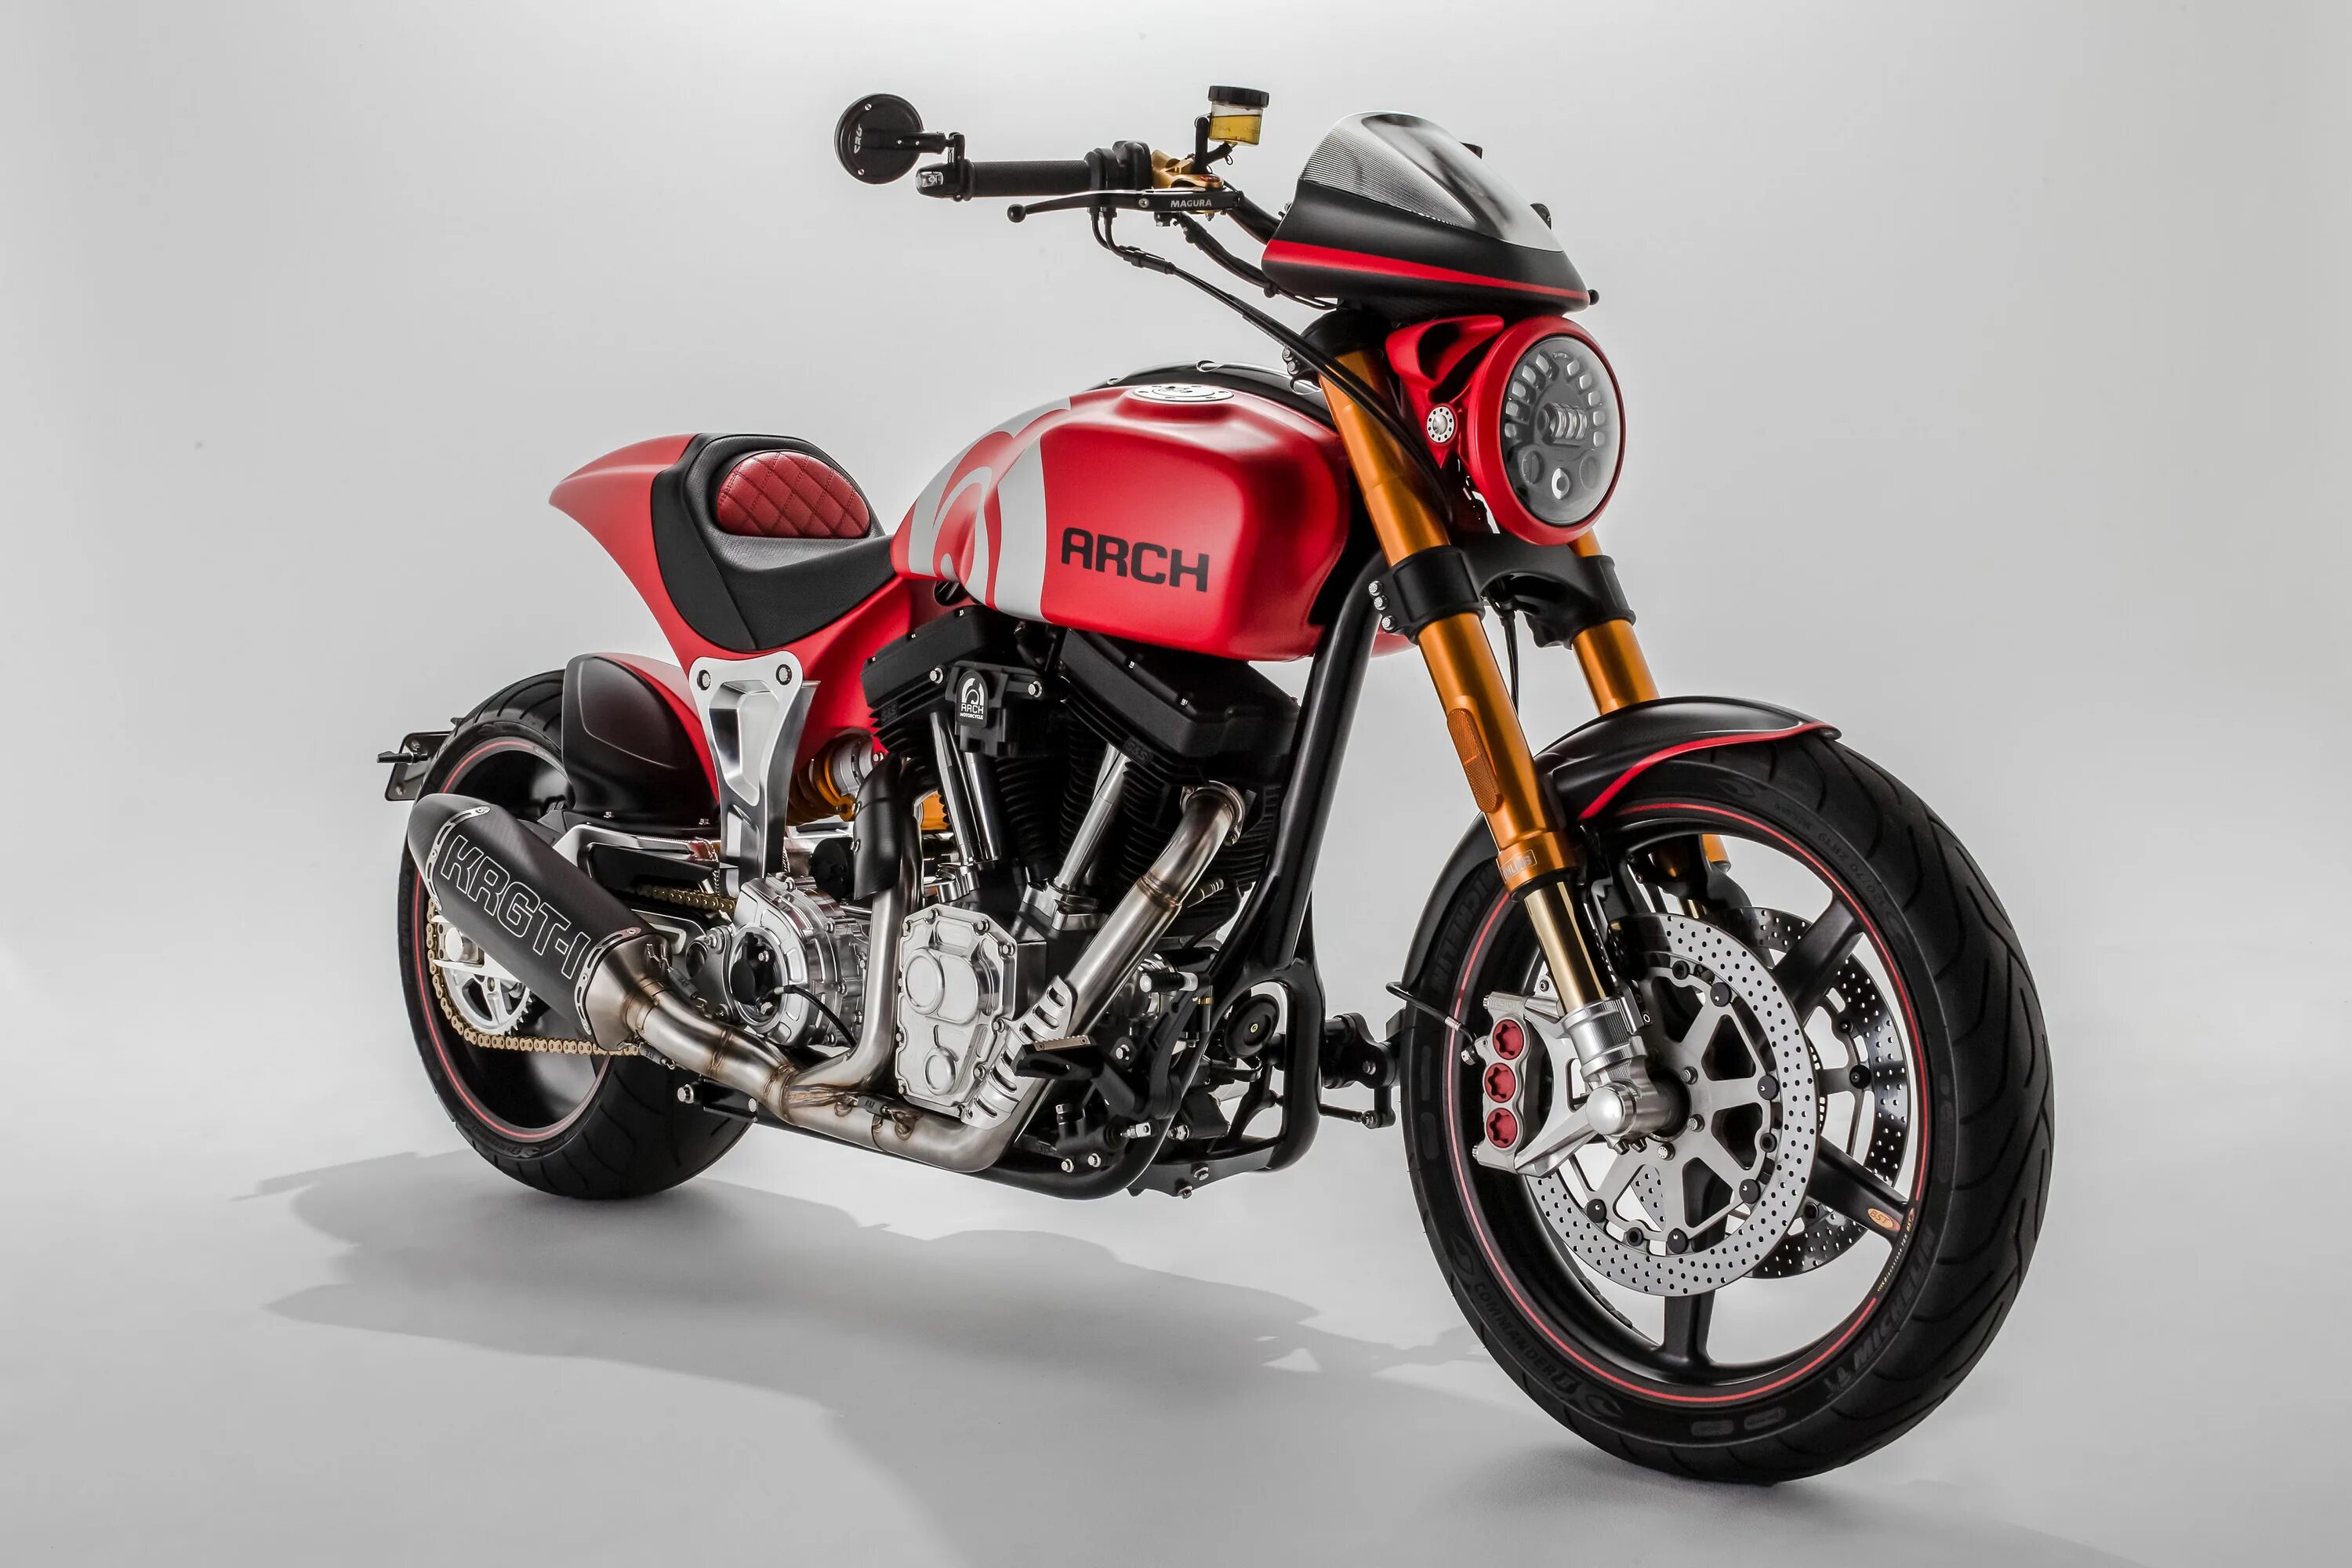 Arch KRGT-1. Arch Motorcycle KRGT-1. Мотоцикл KRGT-1. Мото Arch KRGT 1. Мотоцикл arch